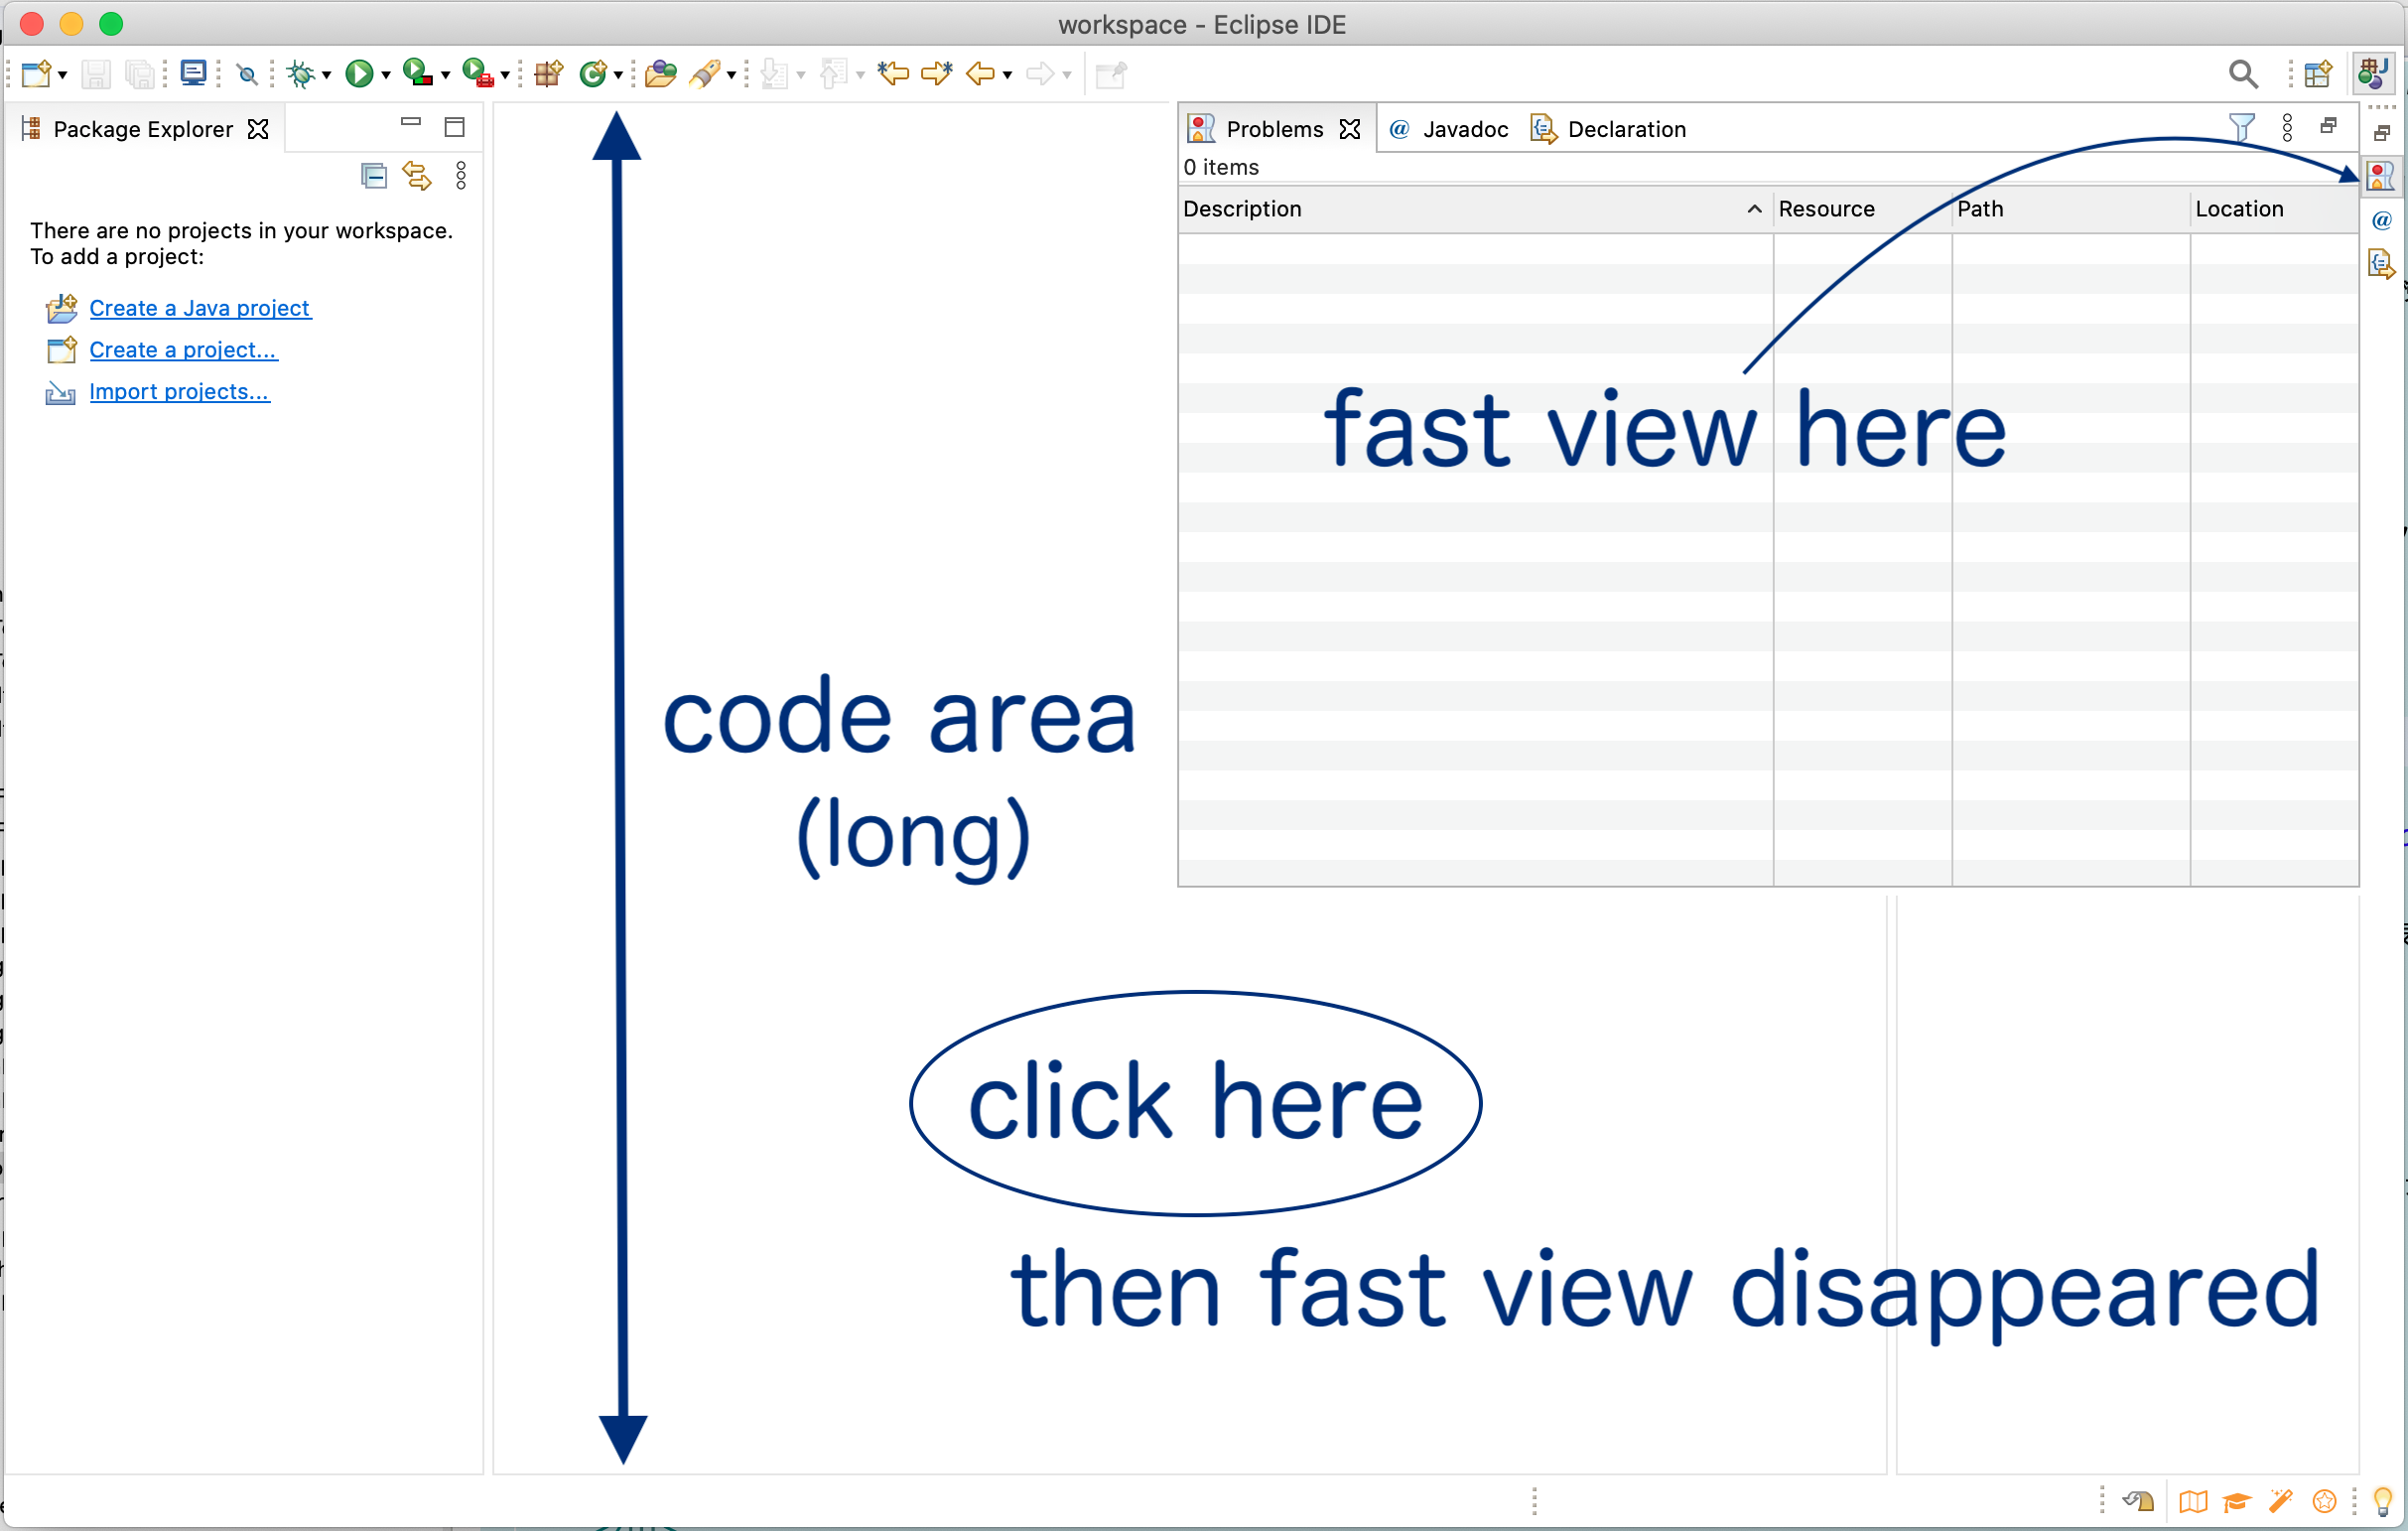 Eclipse ViewLocation long code-area by fast-view